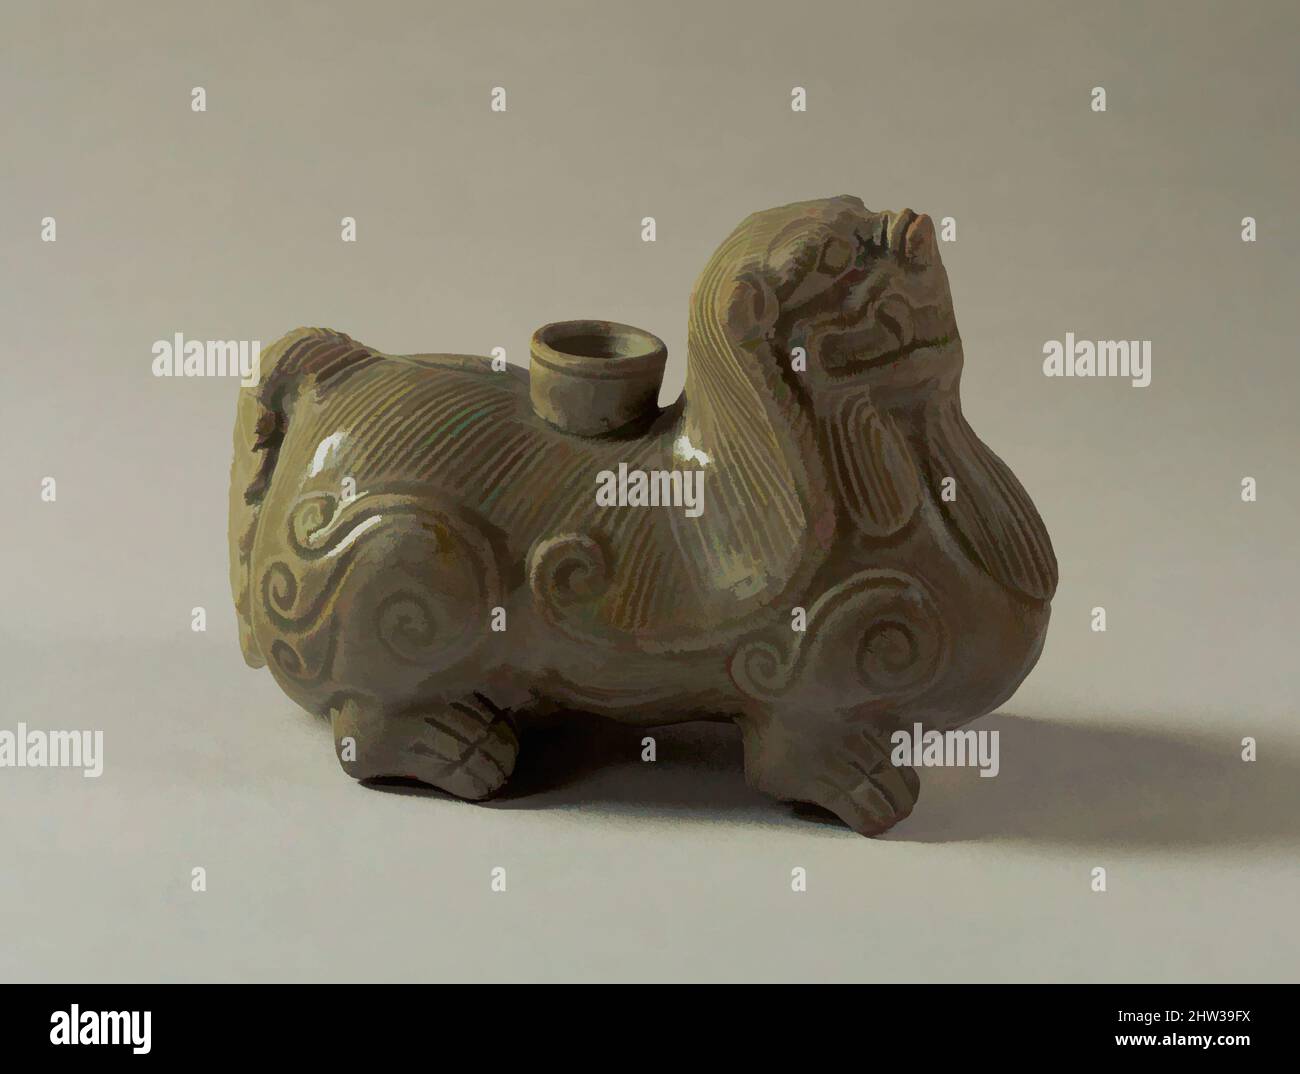 Art inspired by 西晉 神獸形青瓷燭臺, Candle Stand in the Shape of a Fantastic Animal, Western Jin dynasty (265–316), China, Earthenware with green glaze, L. 5 in. (12.7 cm), Ceramics, Classic works modernized by Artotop with a splash of modernity. Shapes, color and value, eye-catching visual impact on art. Emotions through freedom of artworks in a contemporary way. A timeless message pursuing a wildly creative new direction. Artists turning to the digital medium and creating the Artotop NFT Stock Photo